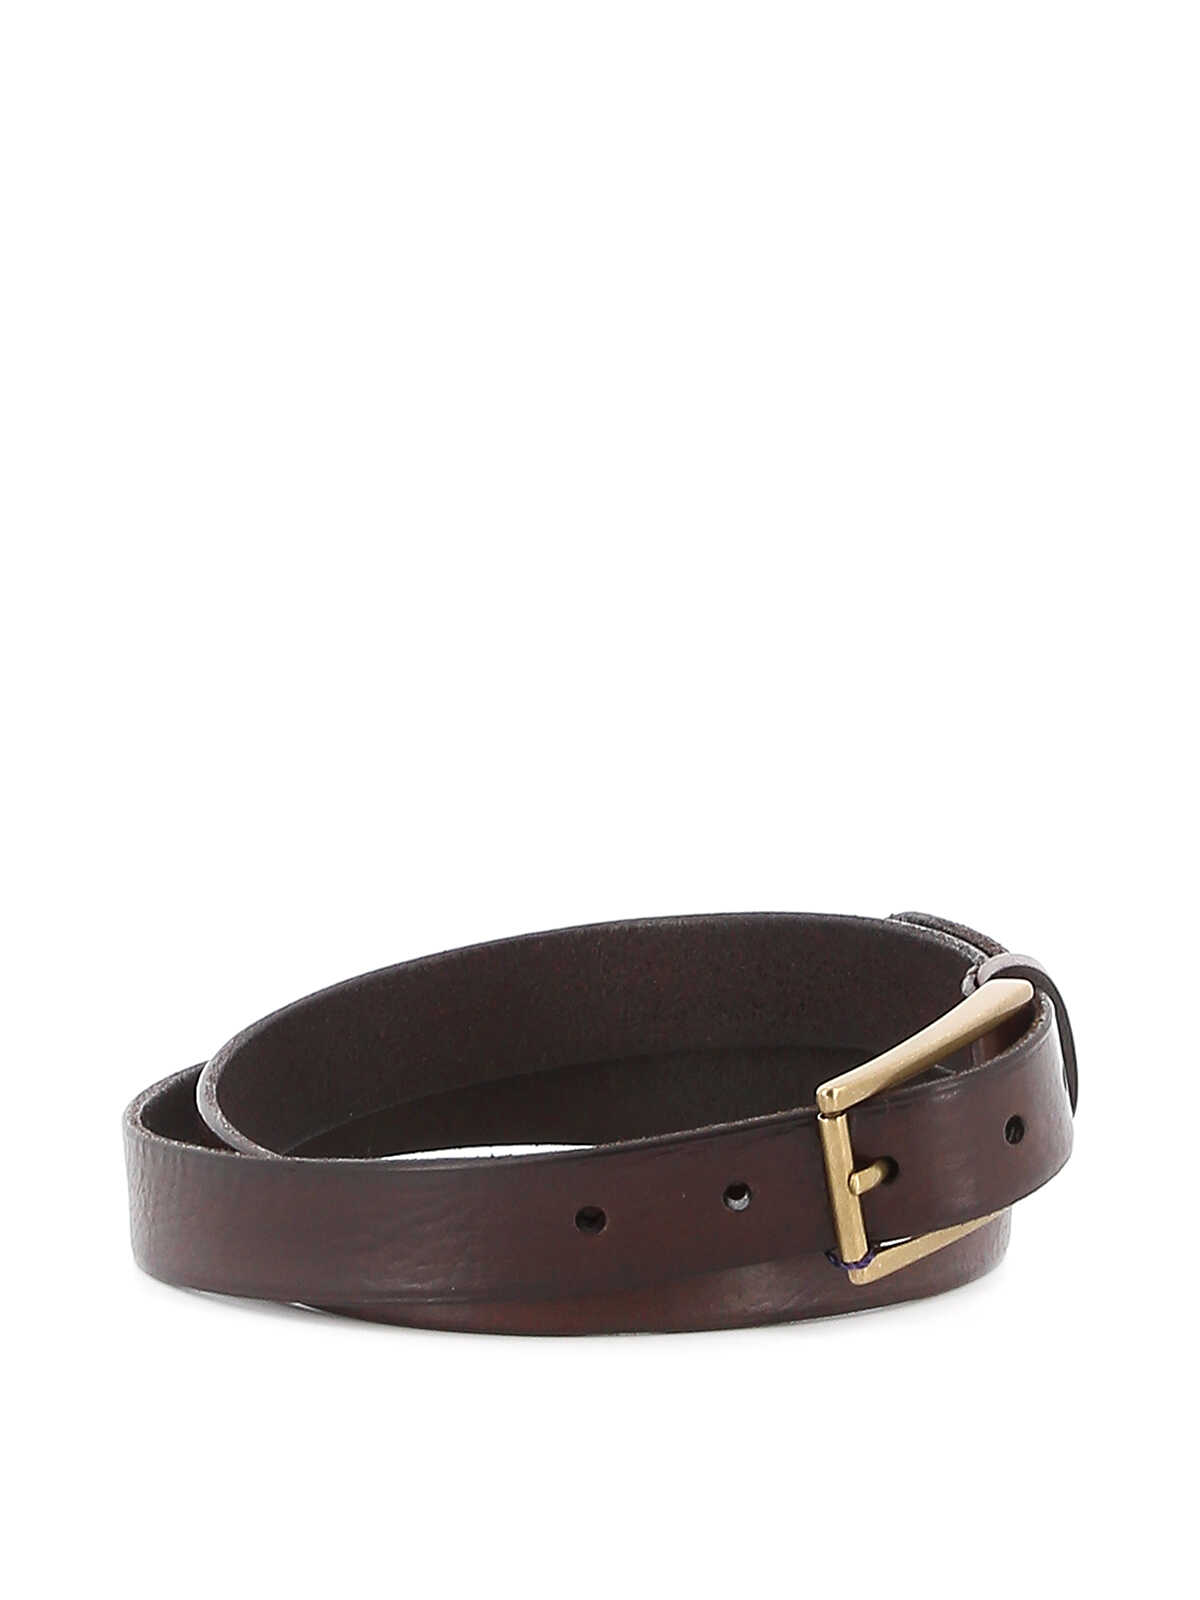 ANDERSONS Anderson`s leather belt 2843 PL100 M1 BROWN M Brown